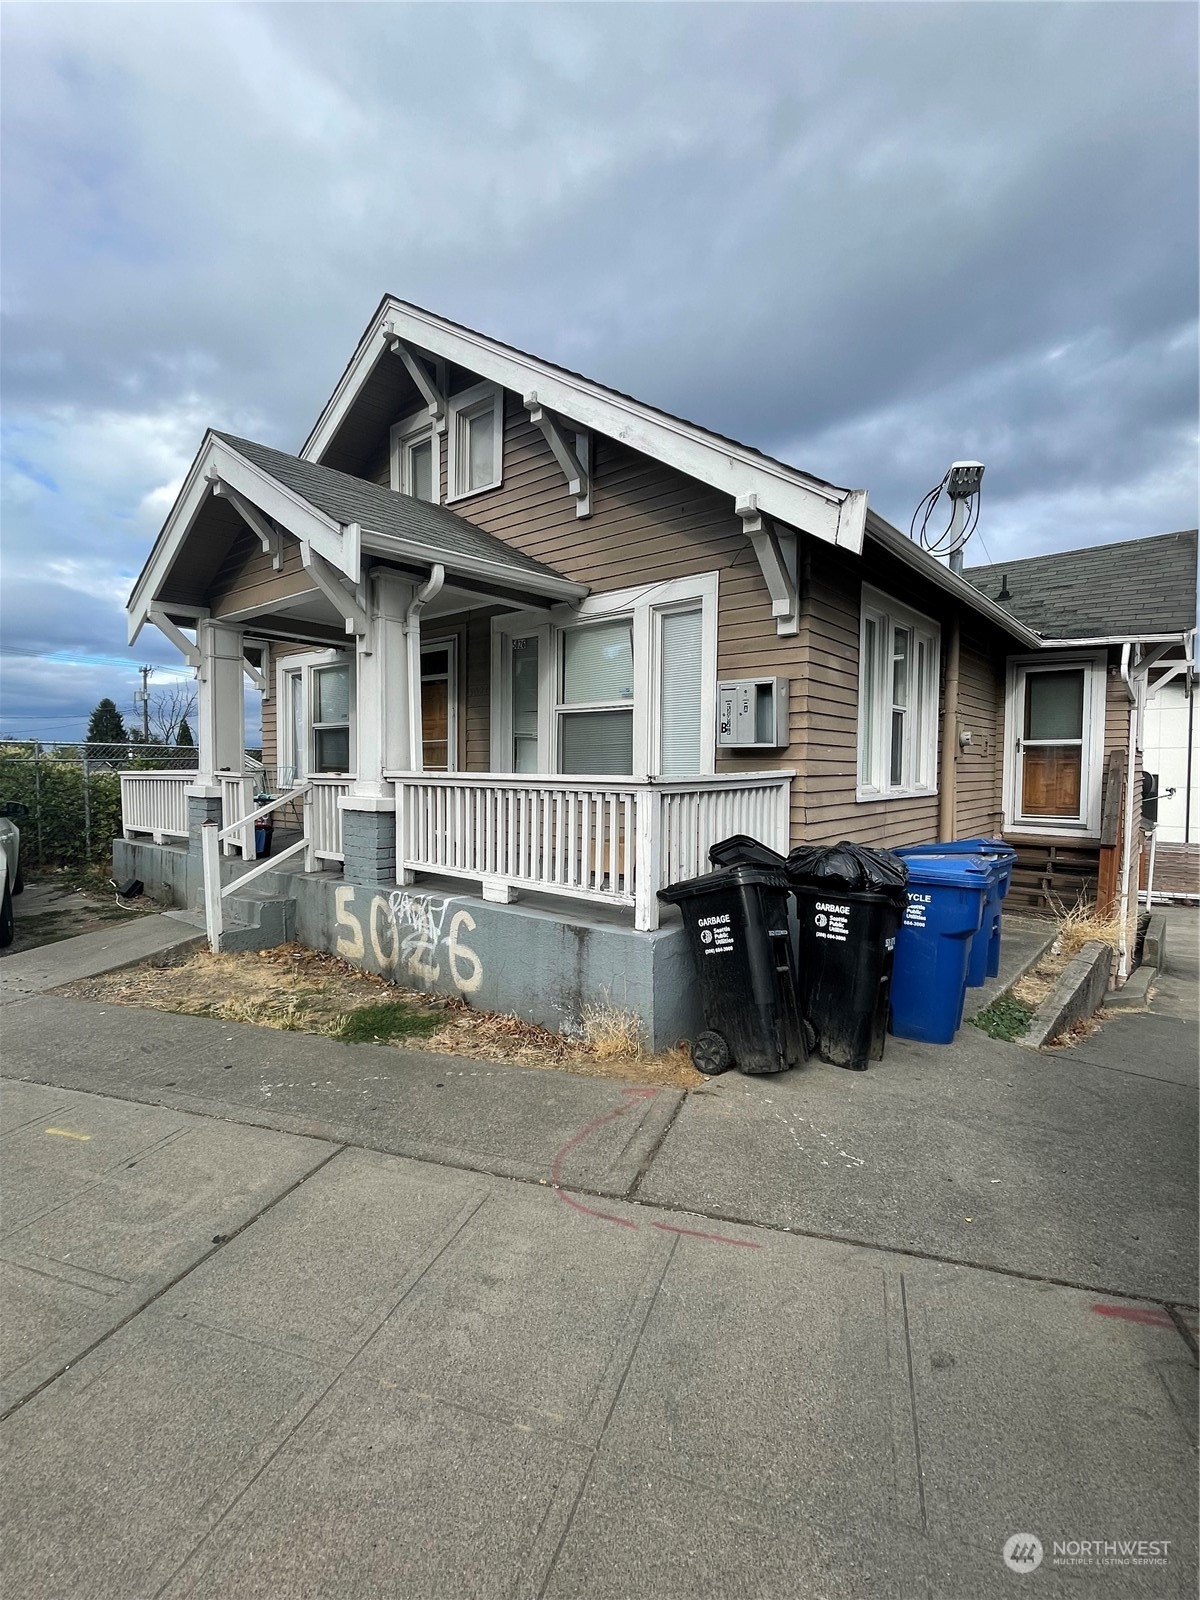 Photo of 5026 Martin Luther King Jr Way S, Seattle, WA 98118